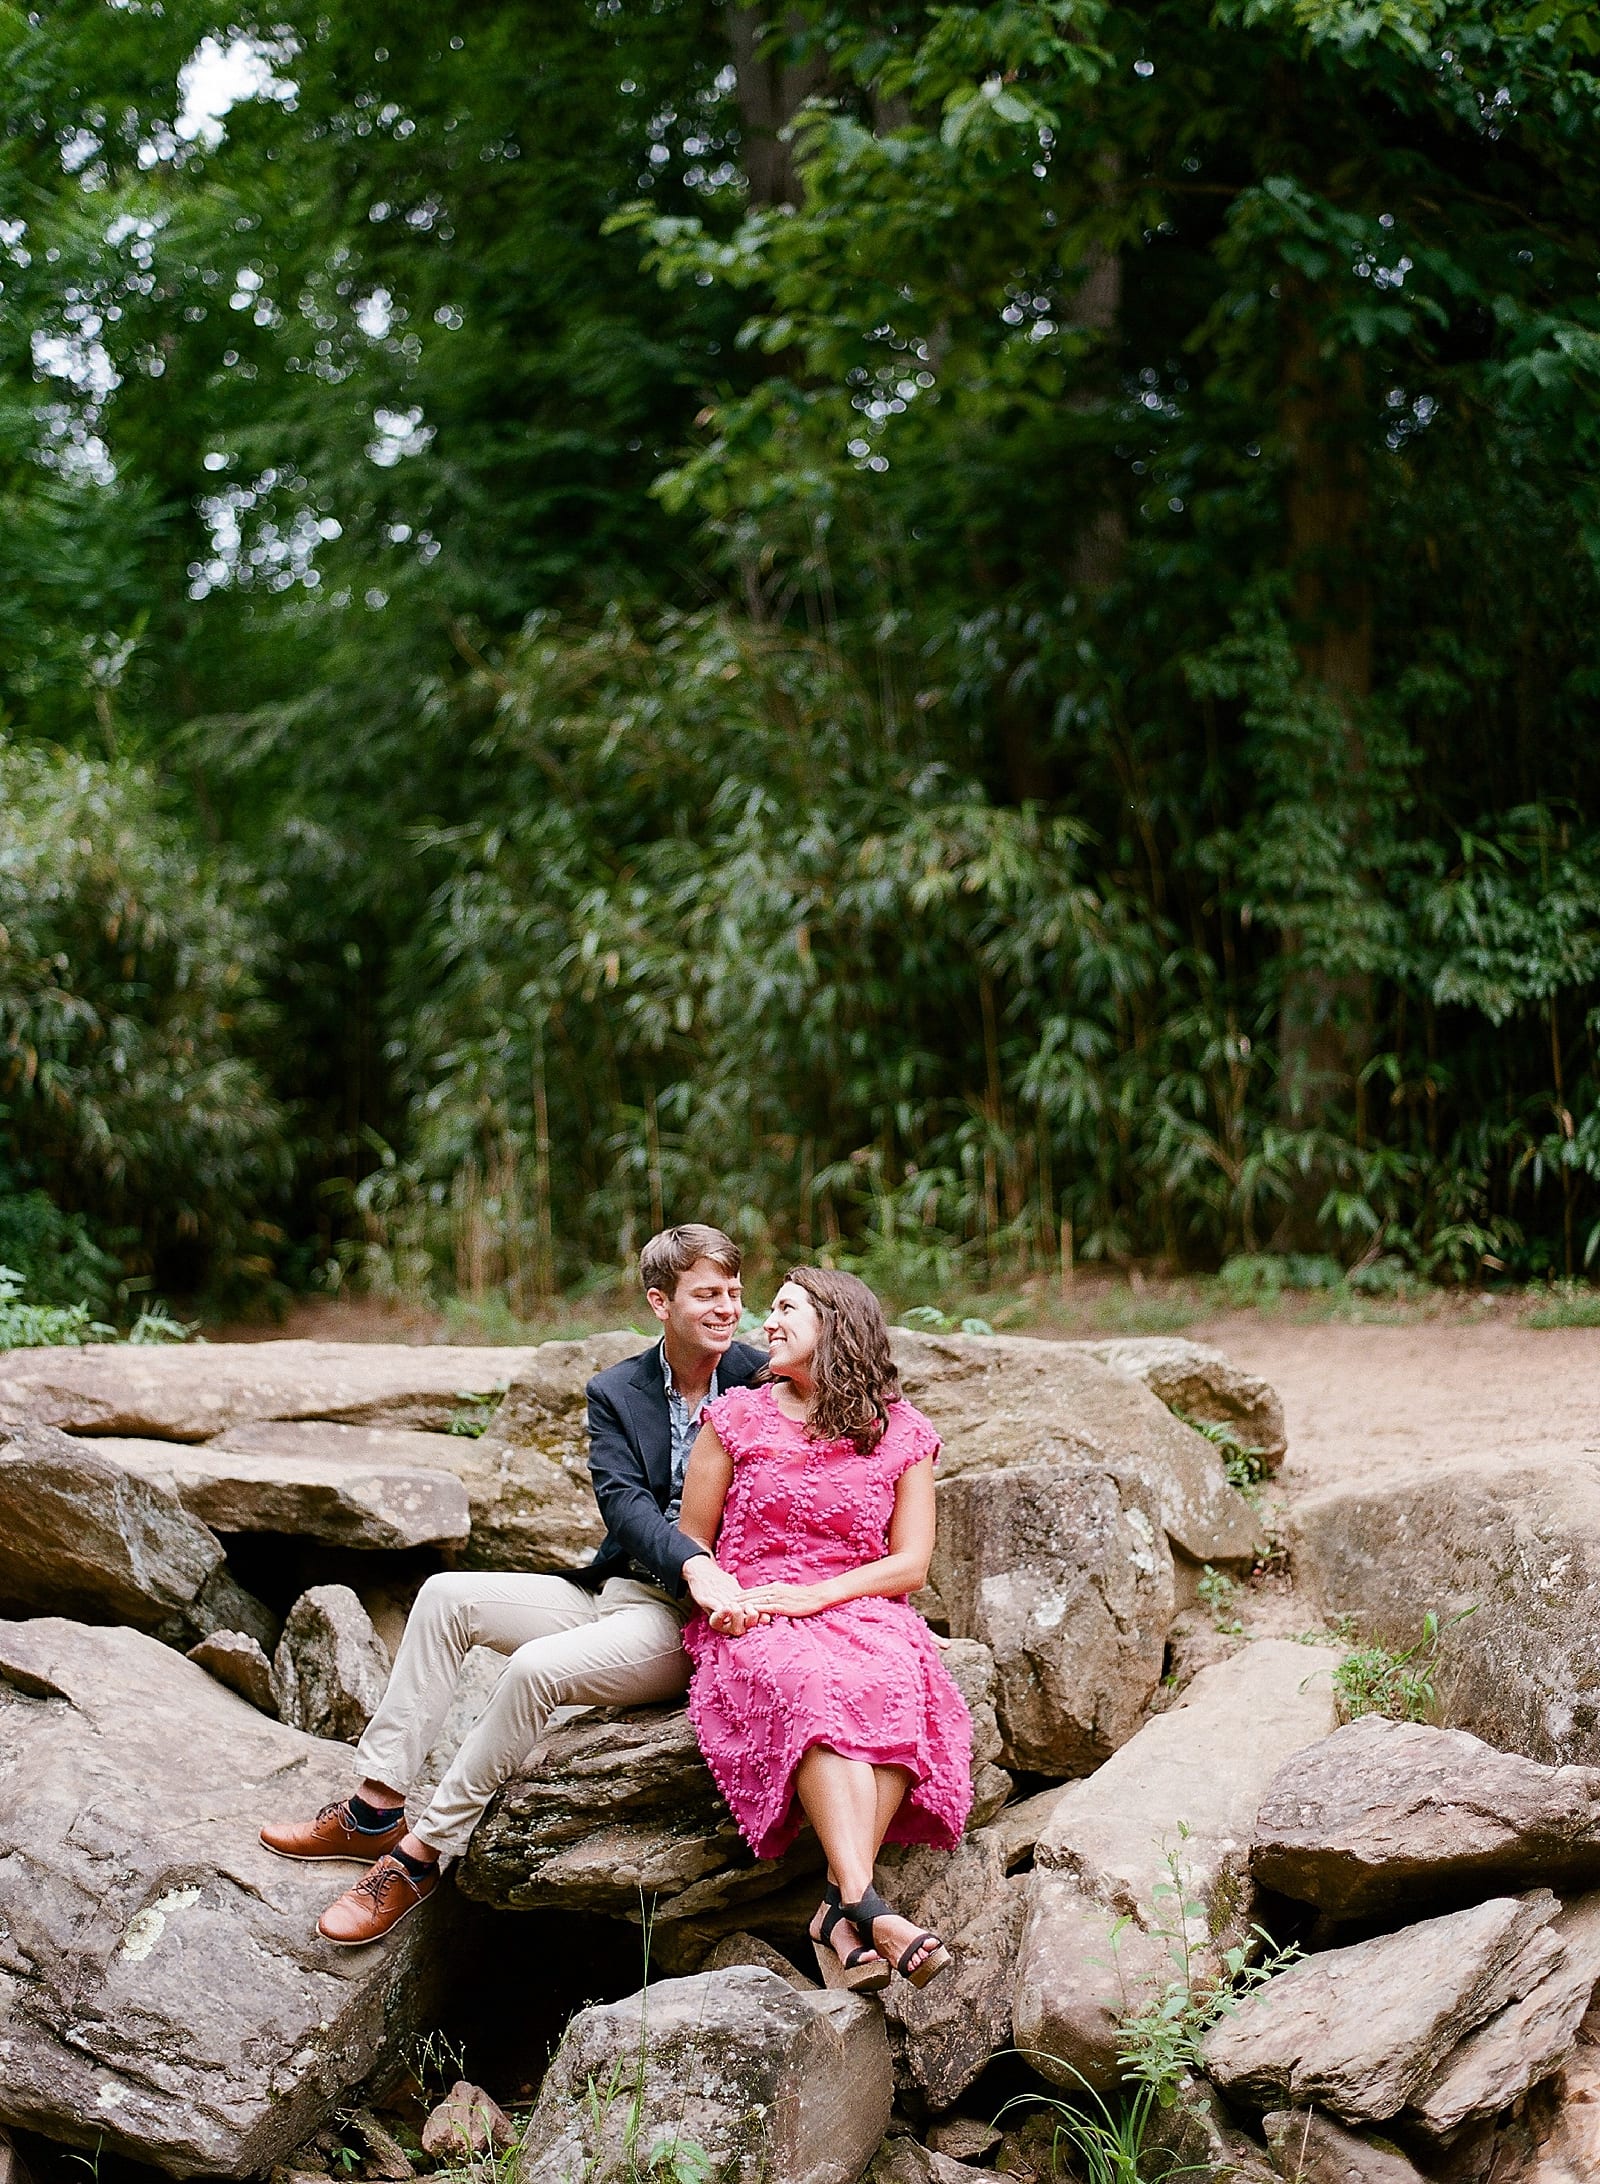 Romantic Biltmore Locations Couple On Rocks Smiling at Each Other Photo